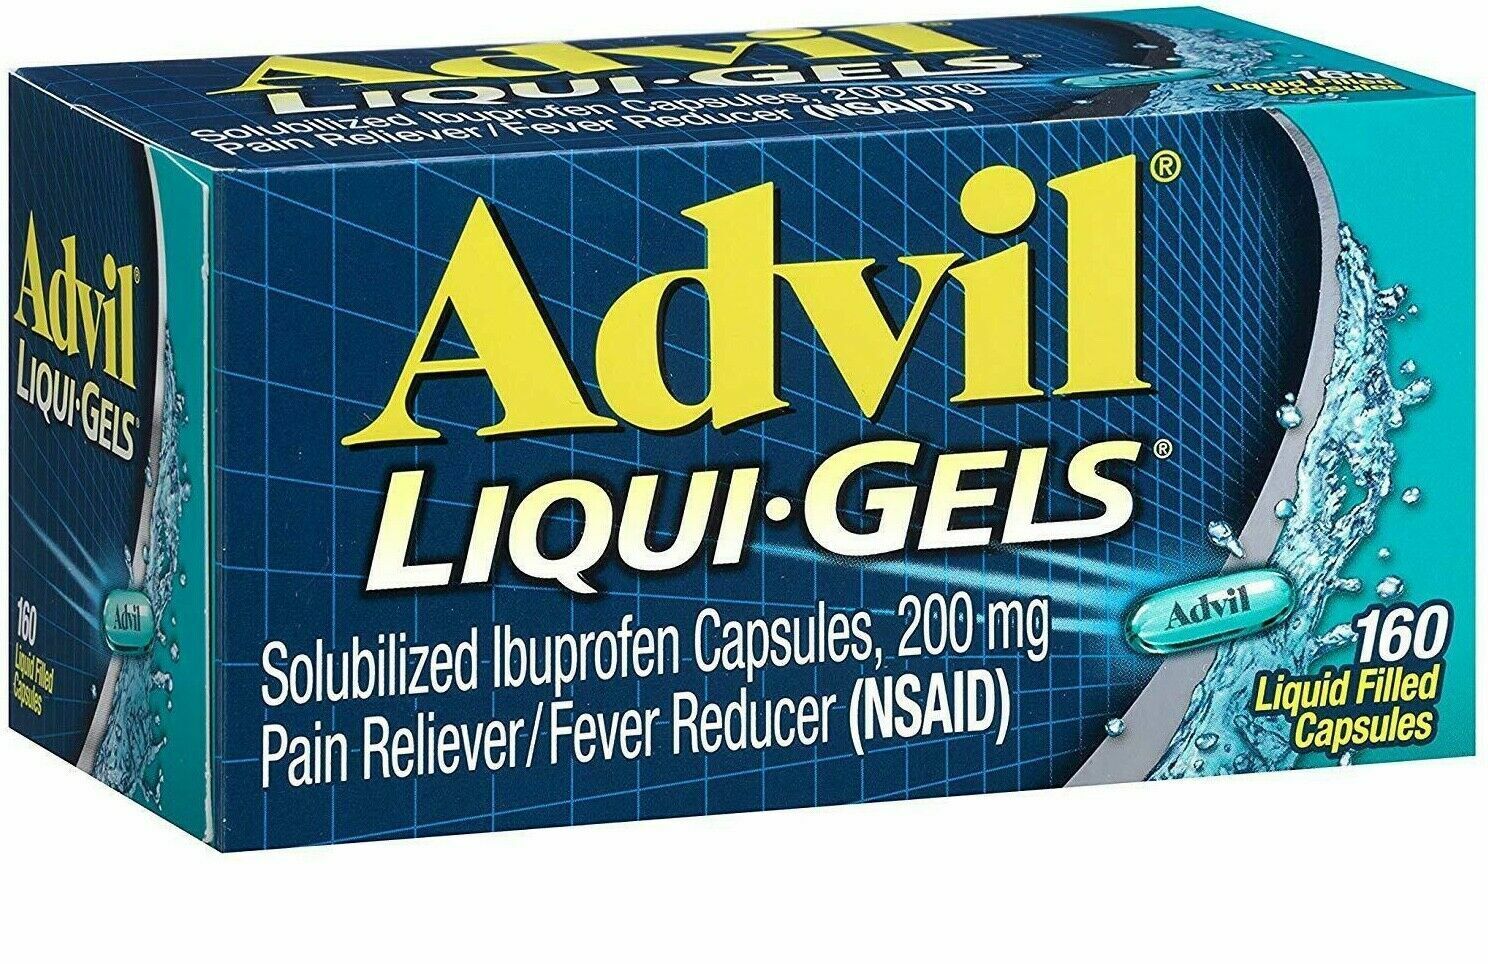 Advil Solubilized Ibuprofen 200 mg Pain Reliever Fever Reducer 160 Capsule 12/22